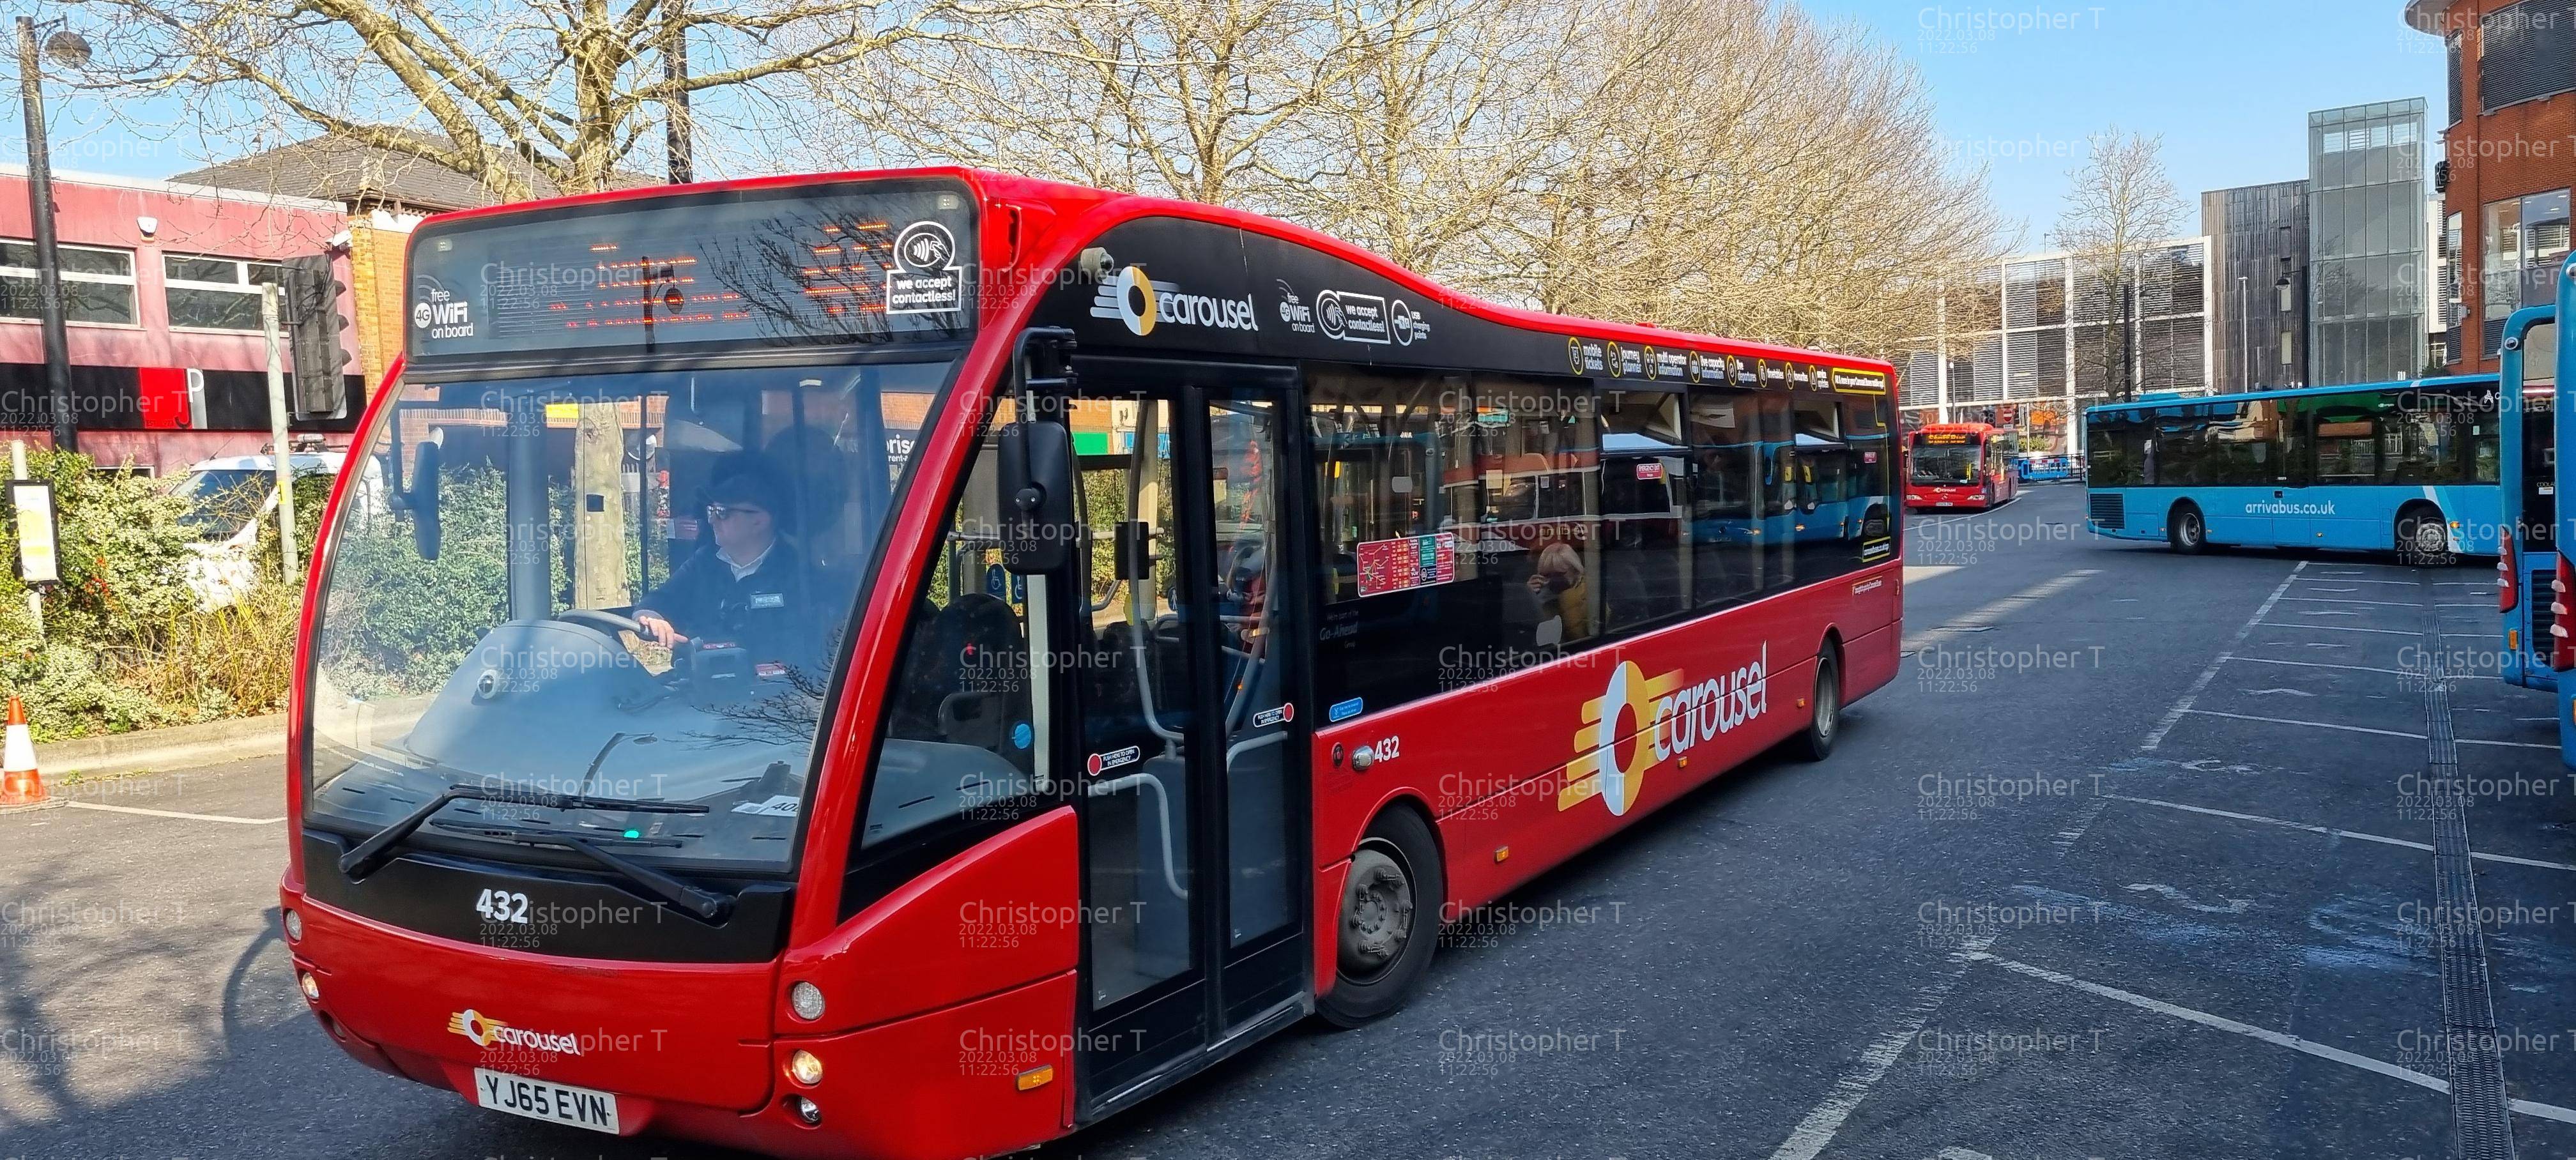 Picture of an Optare Versa vehicle, Image credited to Christopher T.